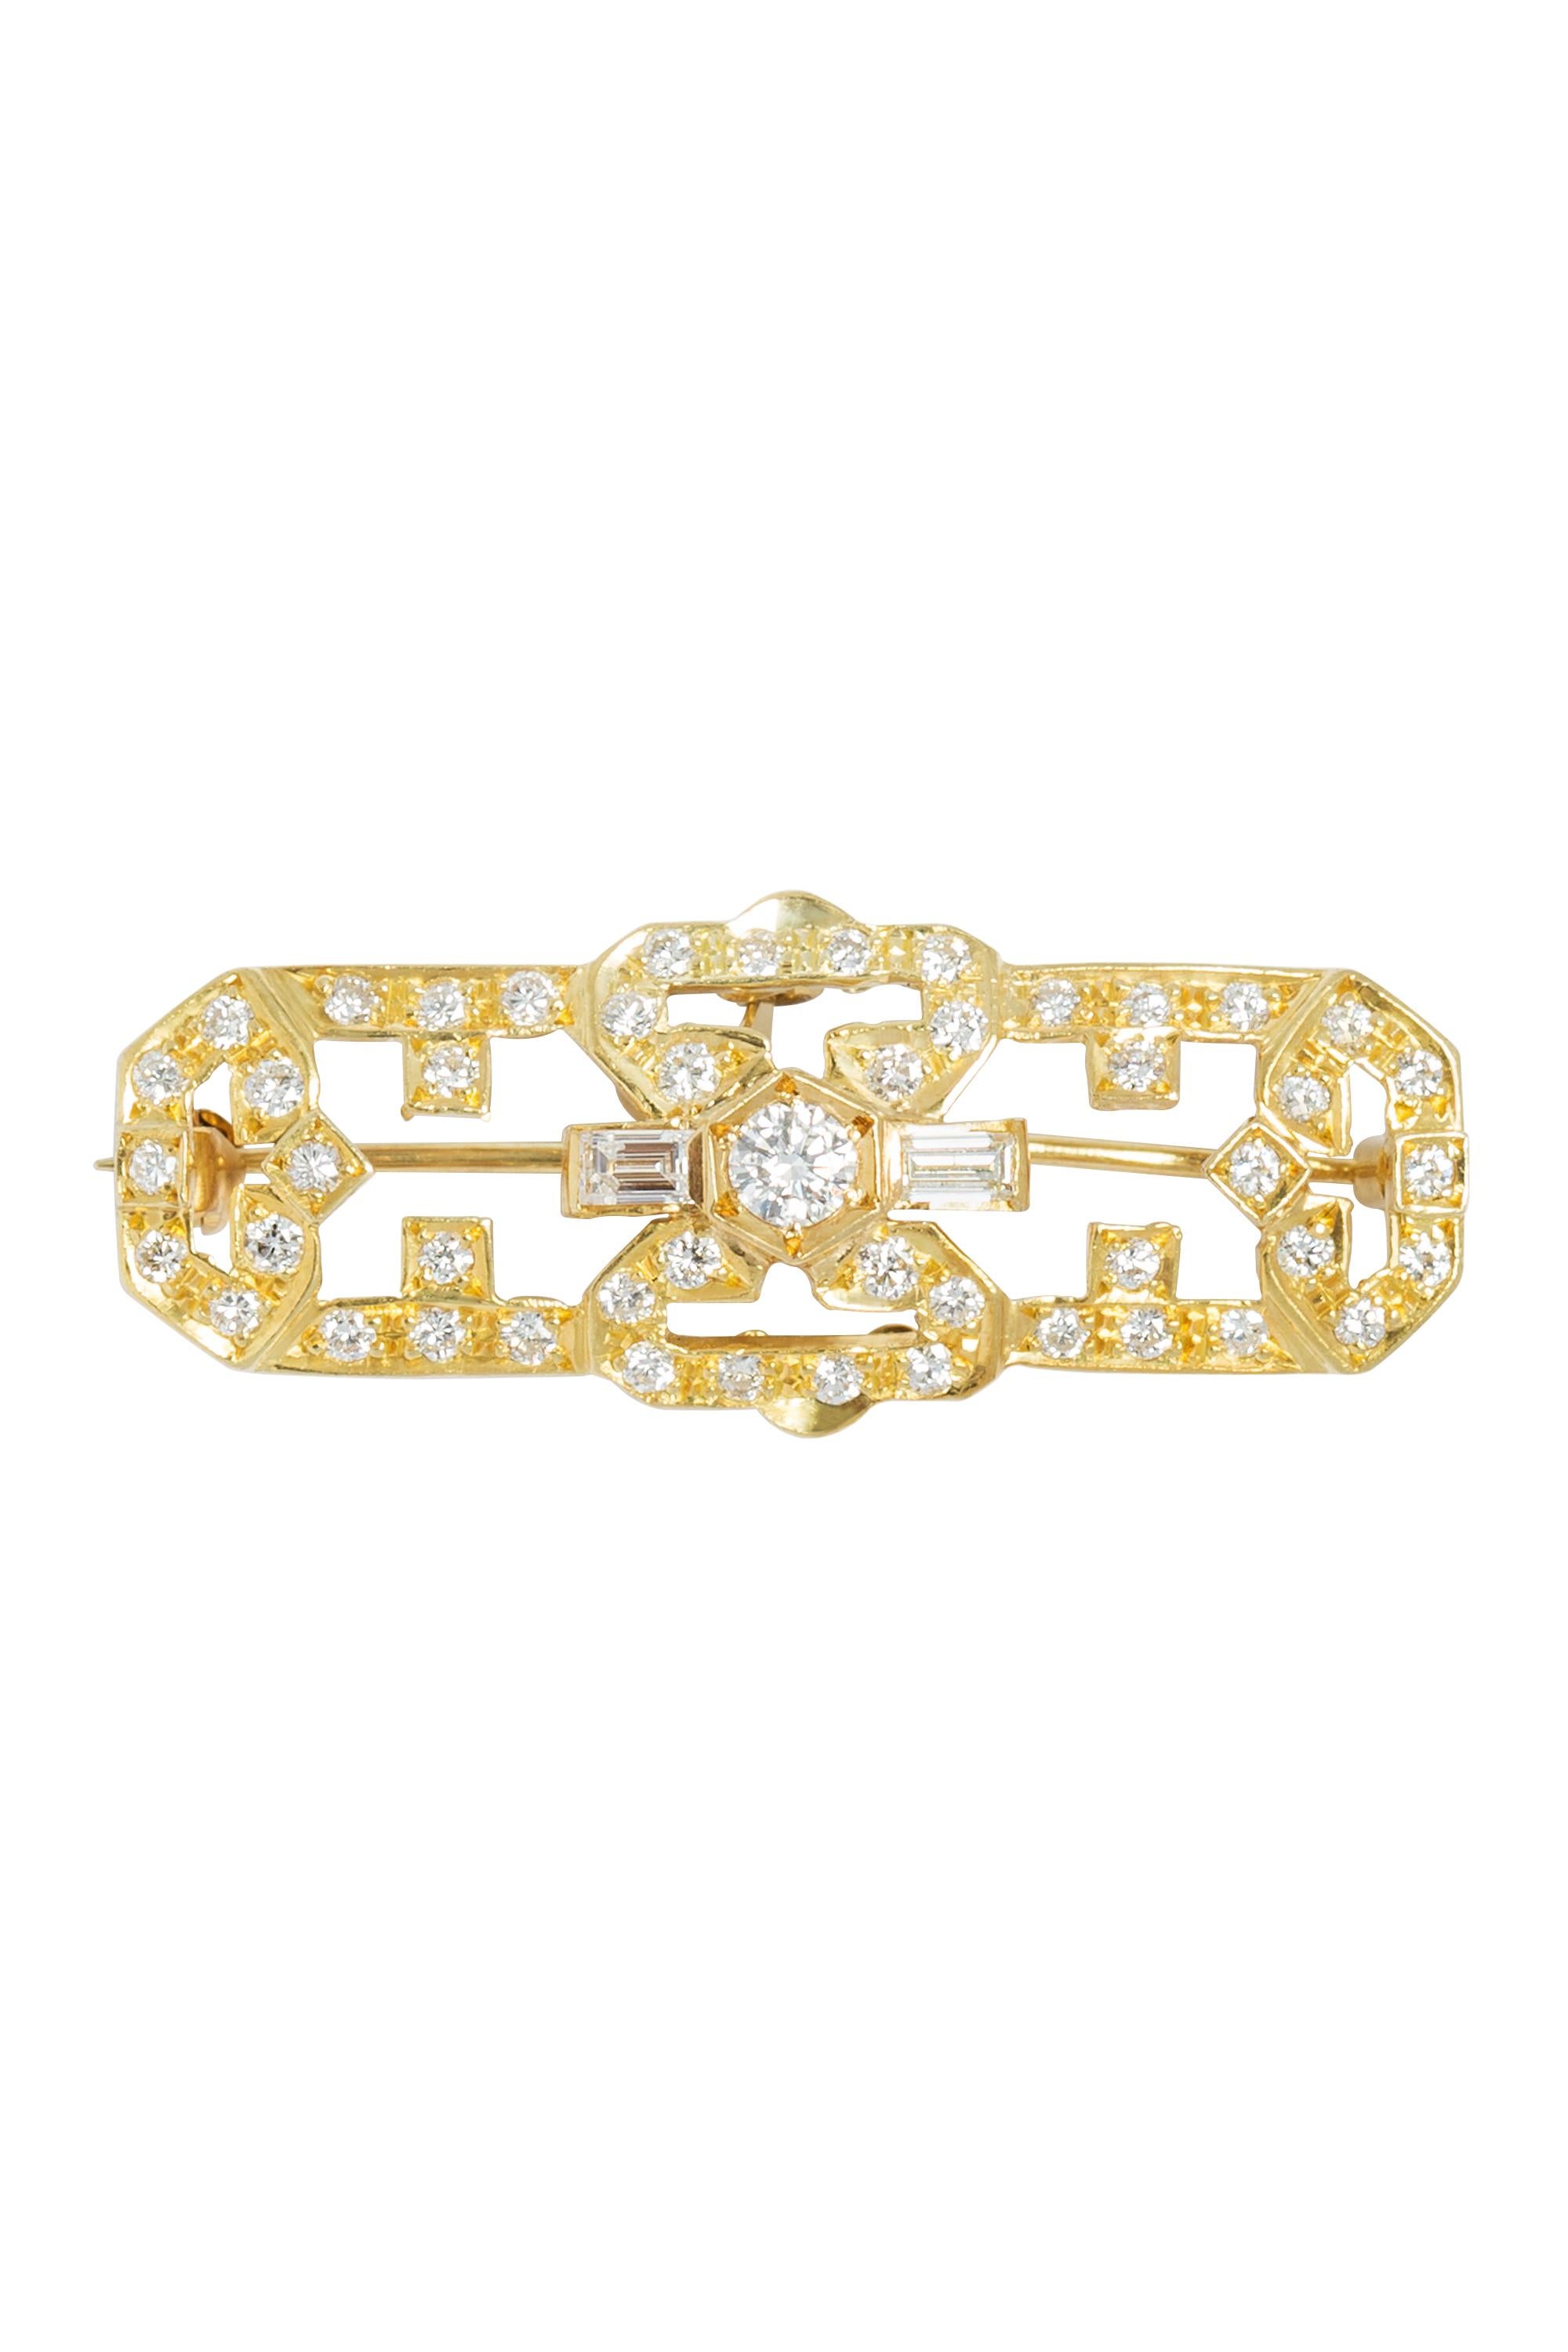 Diamond and 18 Karat Yellow Gold Convertible Brooch In Excellent Condition For Sale In beverly hills, CA